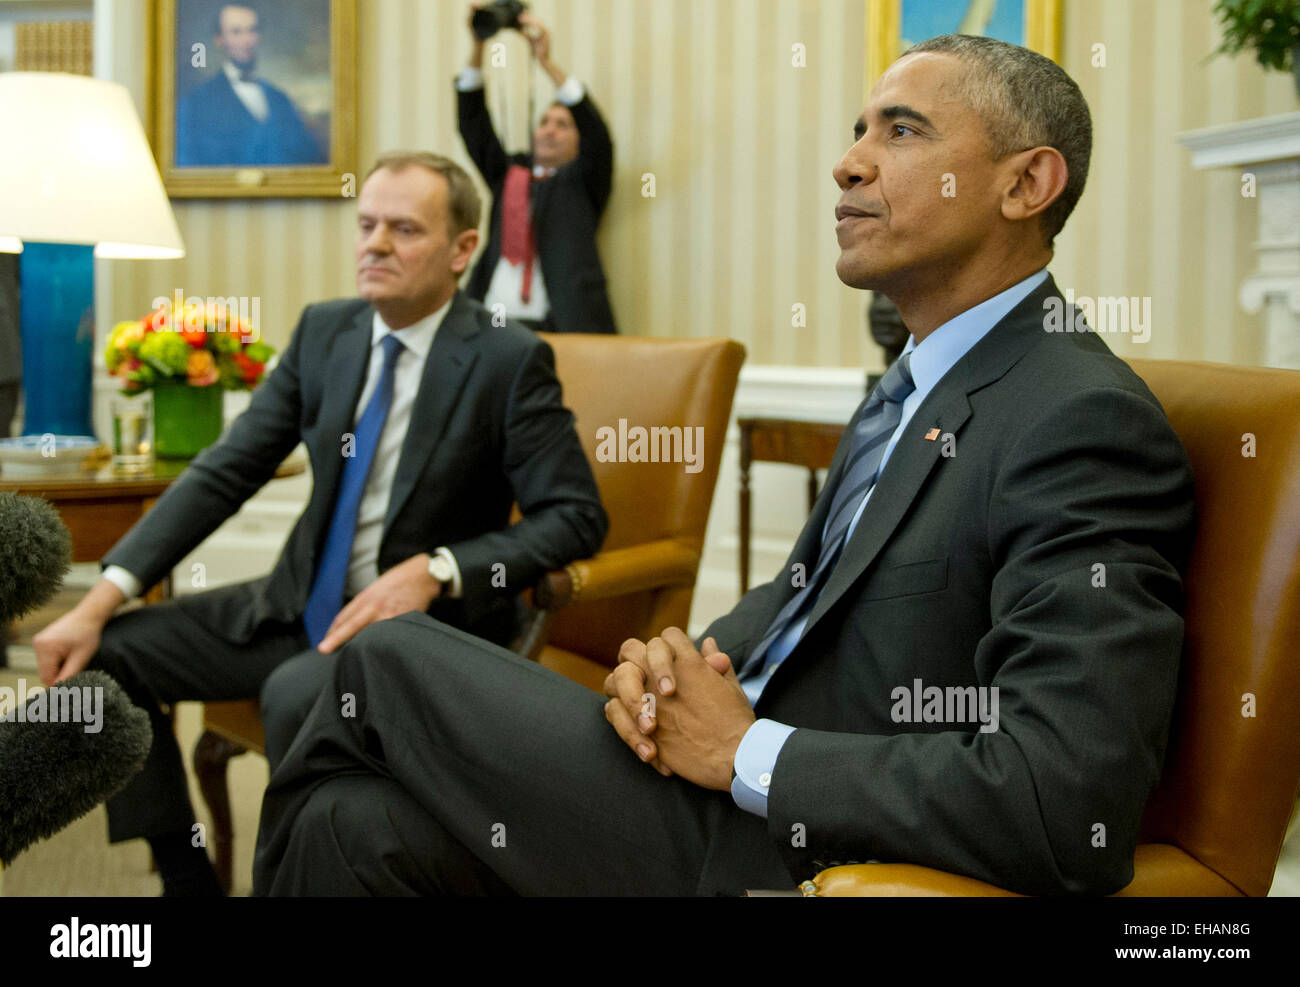 United States President Barack Obama hosts European Council President Donald Tusk in the Oval Office of the White House in Washington, DC on Monday, March 9, 2015. Credit: Ron Sachs/Pool via CNP - NO WIRE SERVICE - Stock Photo